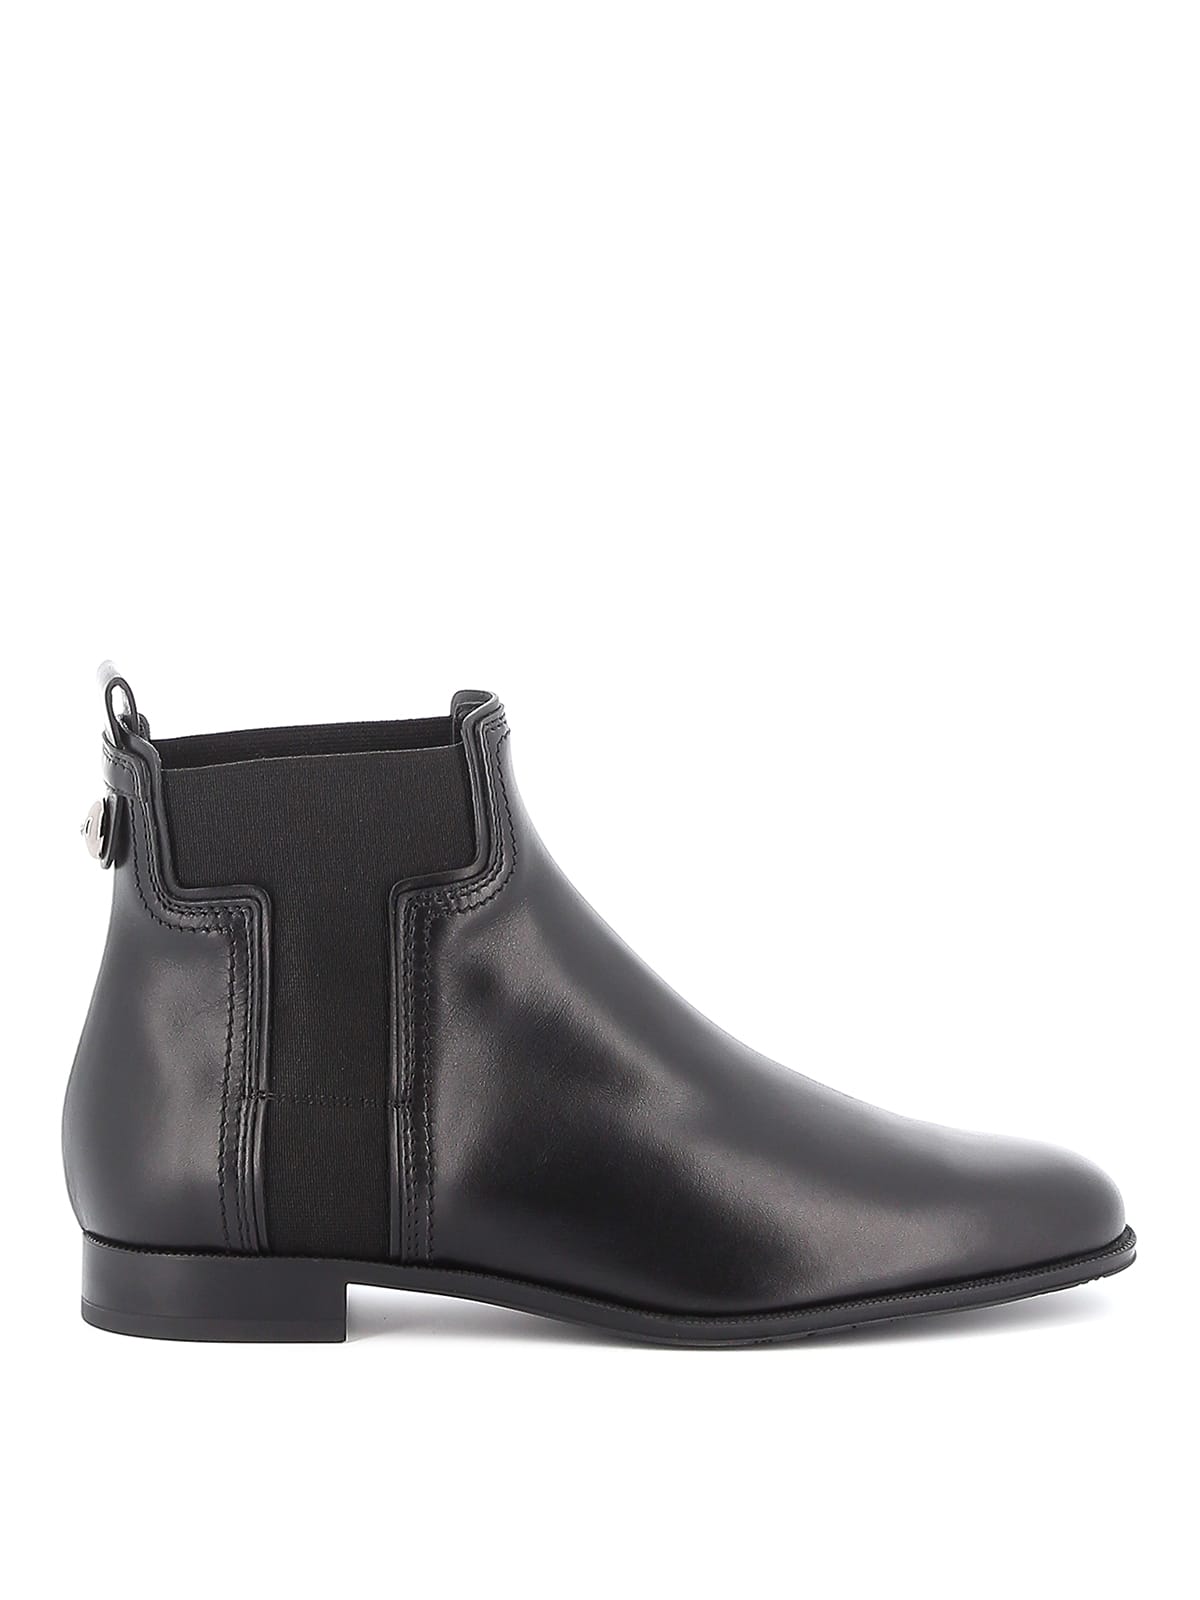 TOD'S BOOTS,11086537